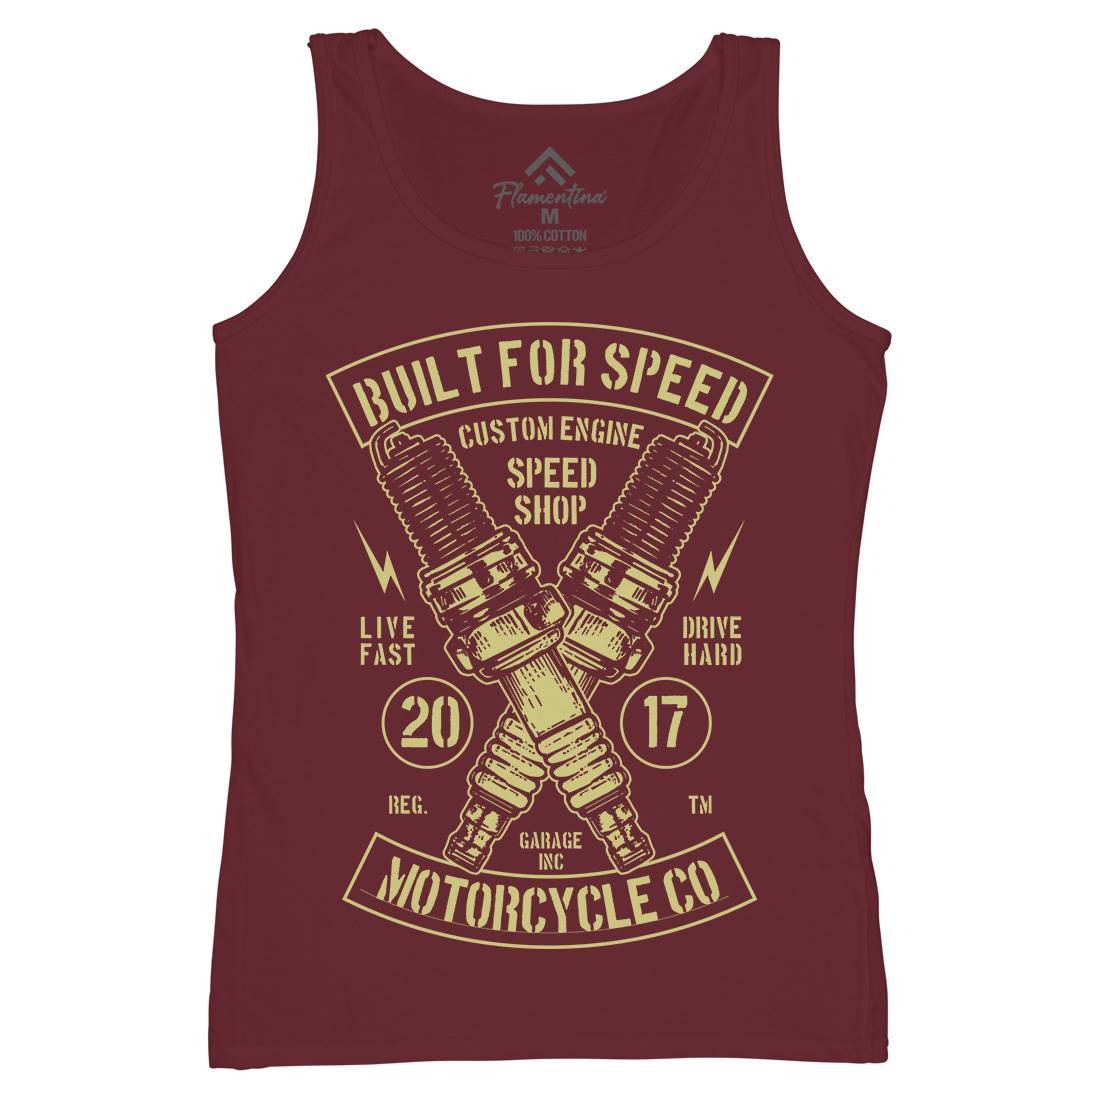 Built For Speed Womens Organic Tank Top Vest Motorcycles B188